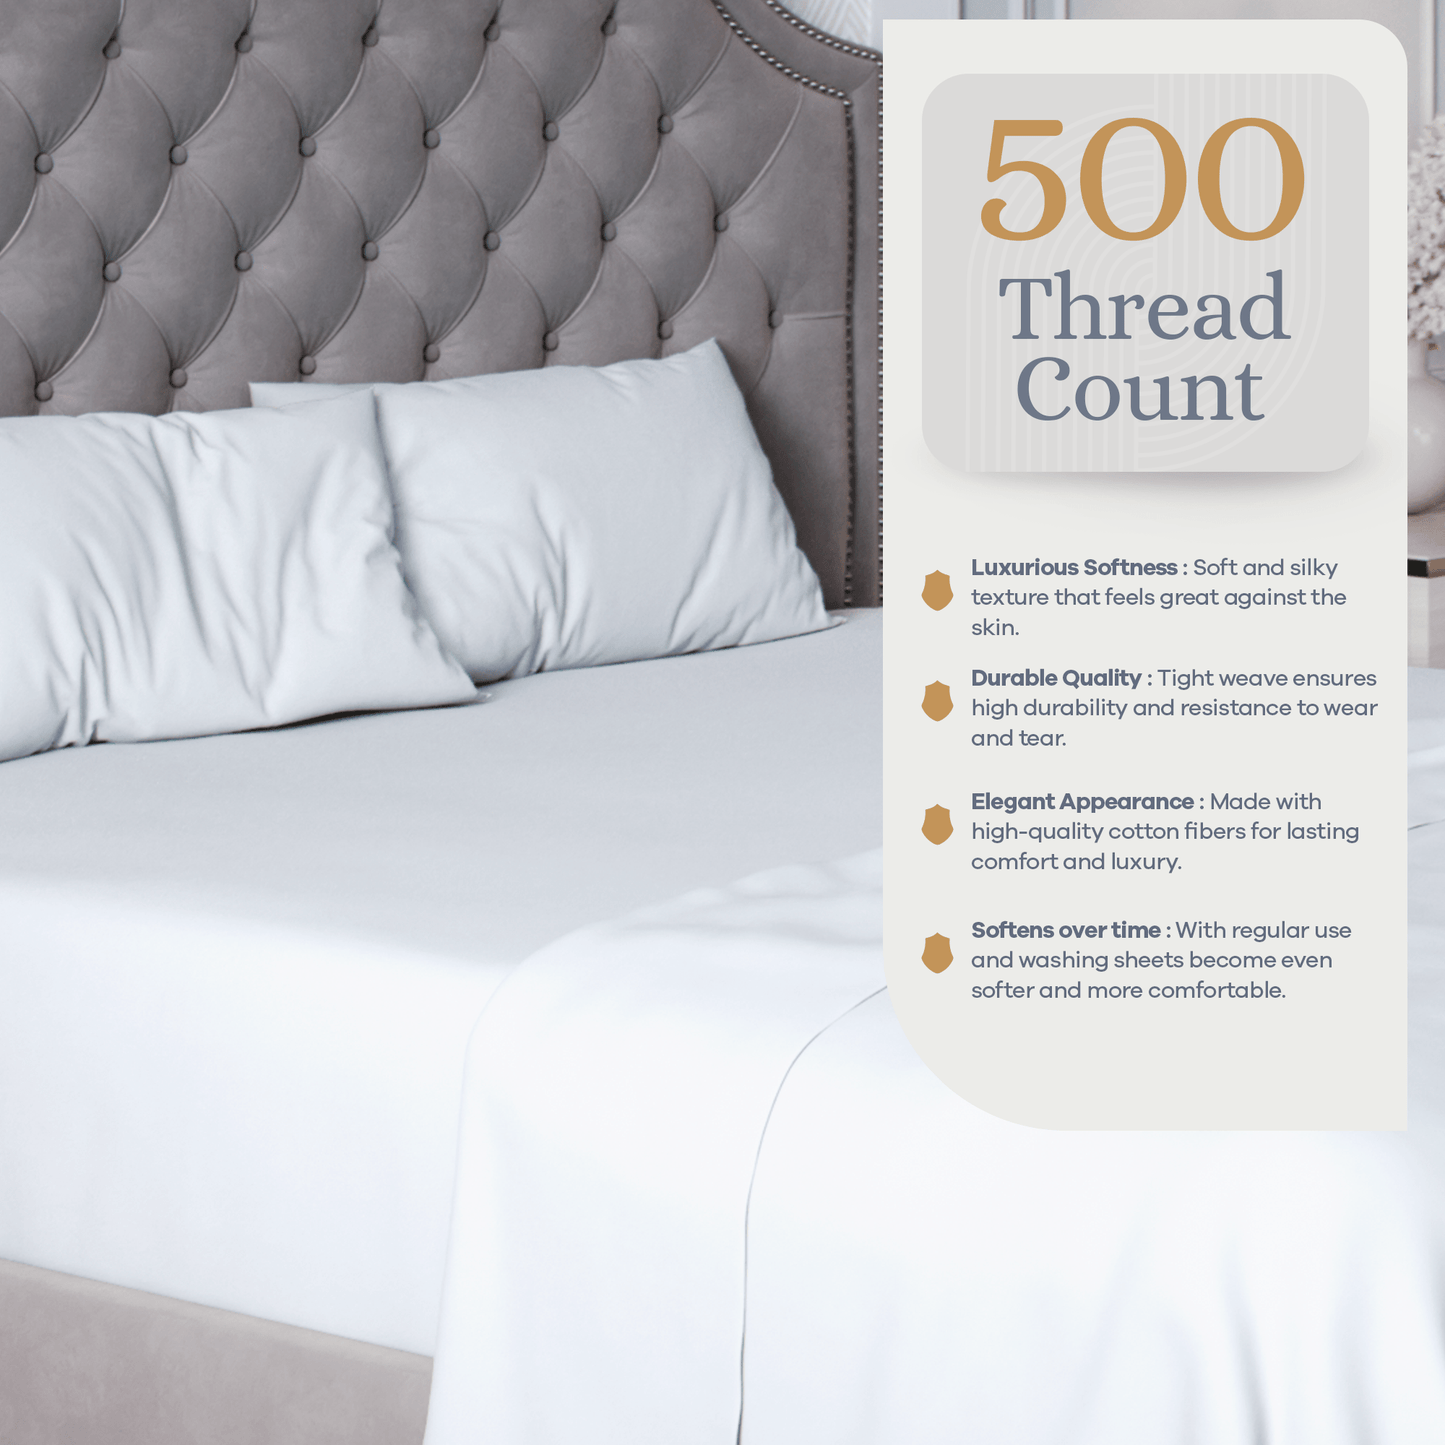 Premium Italian Crafted Percale Sheet Set, 500 Thread Count Sven & Son 